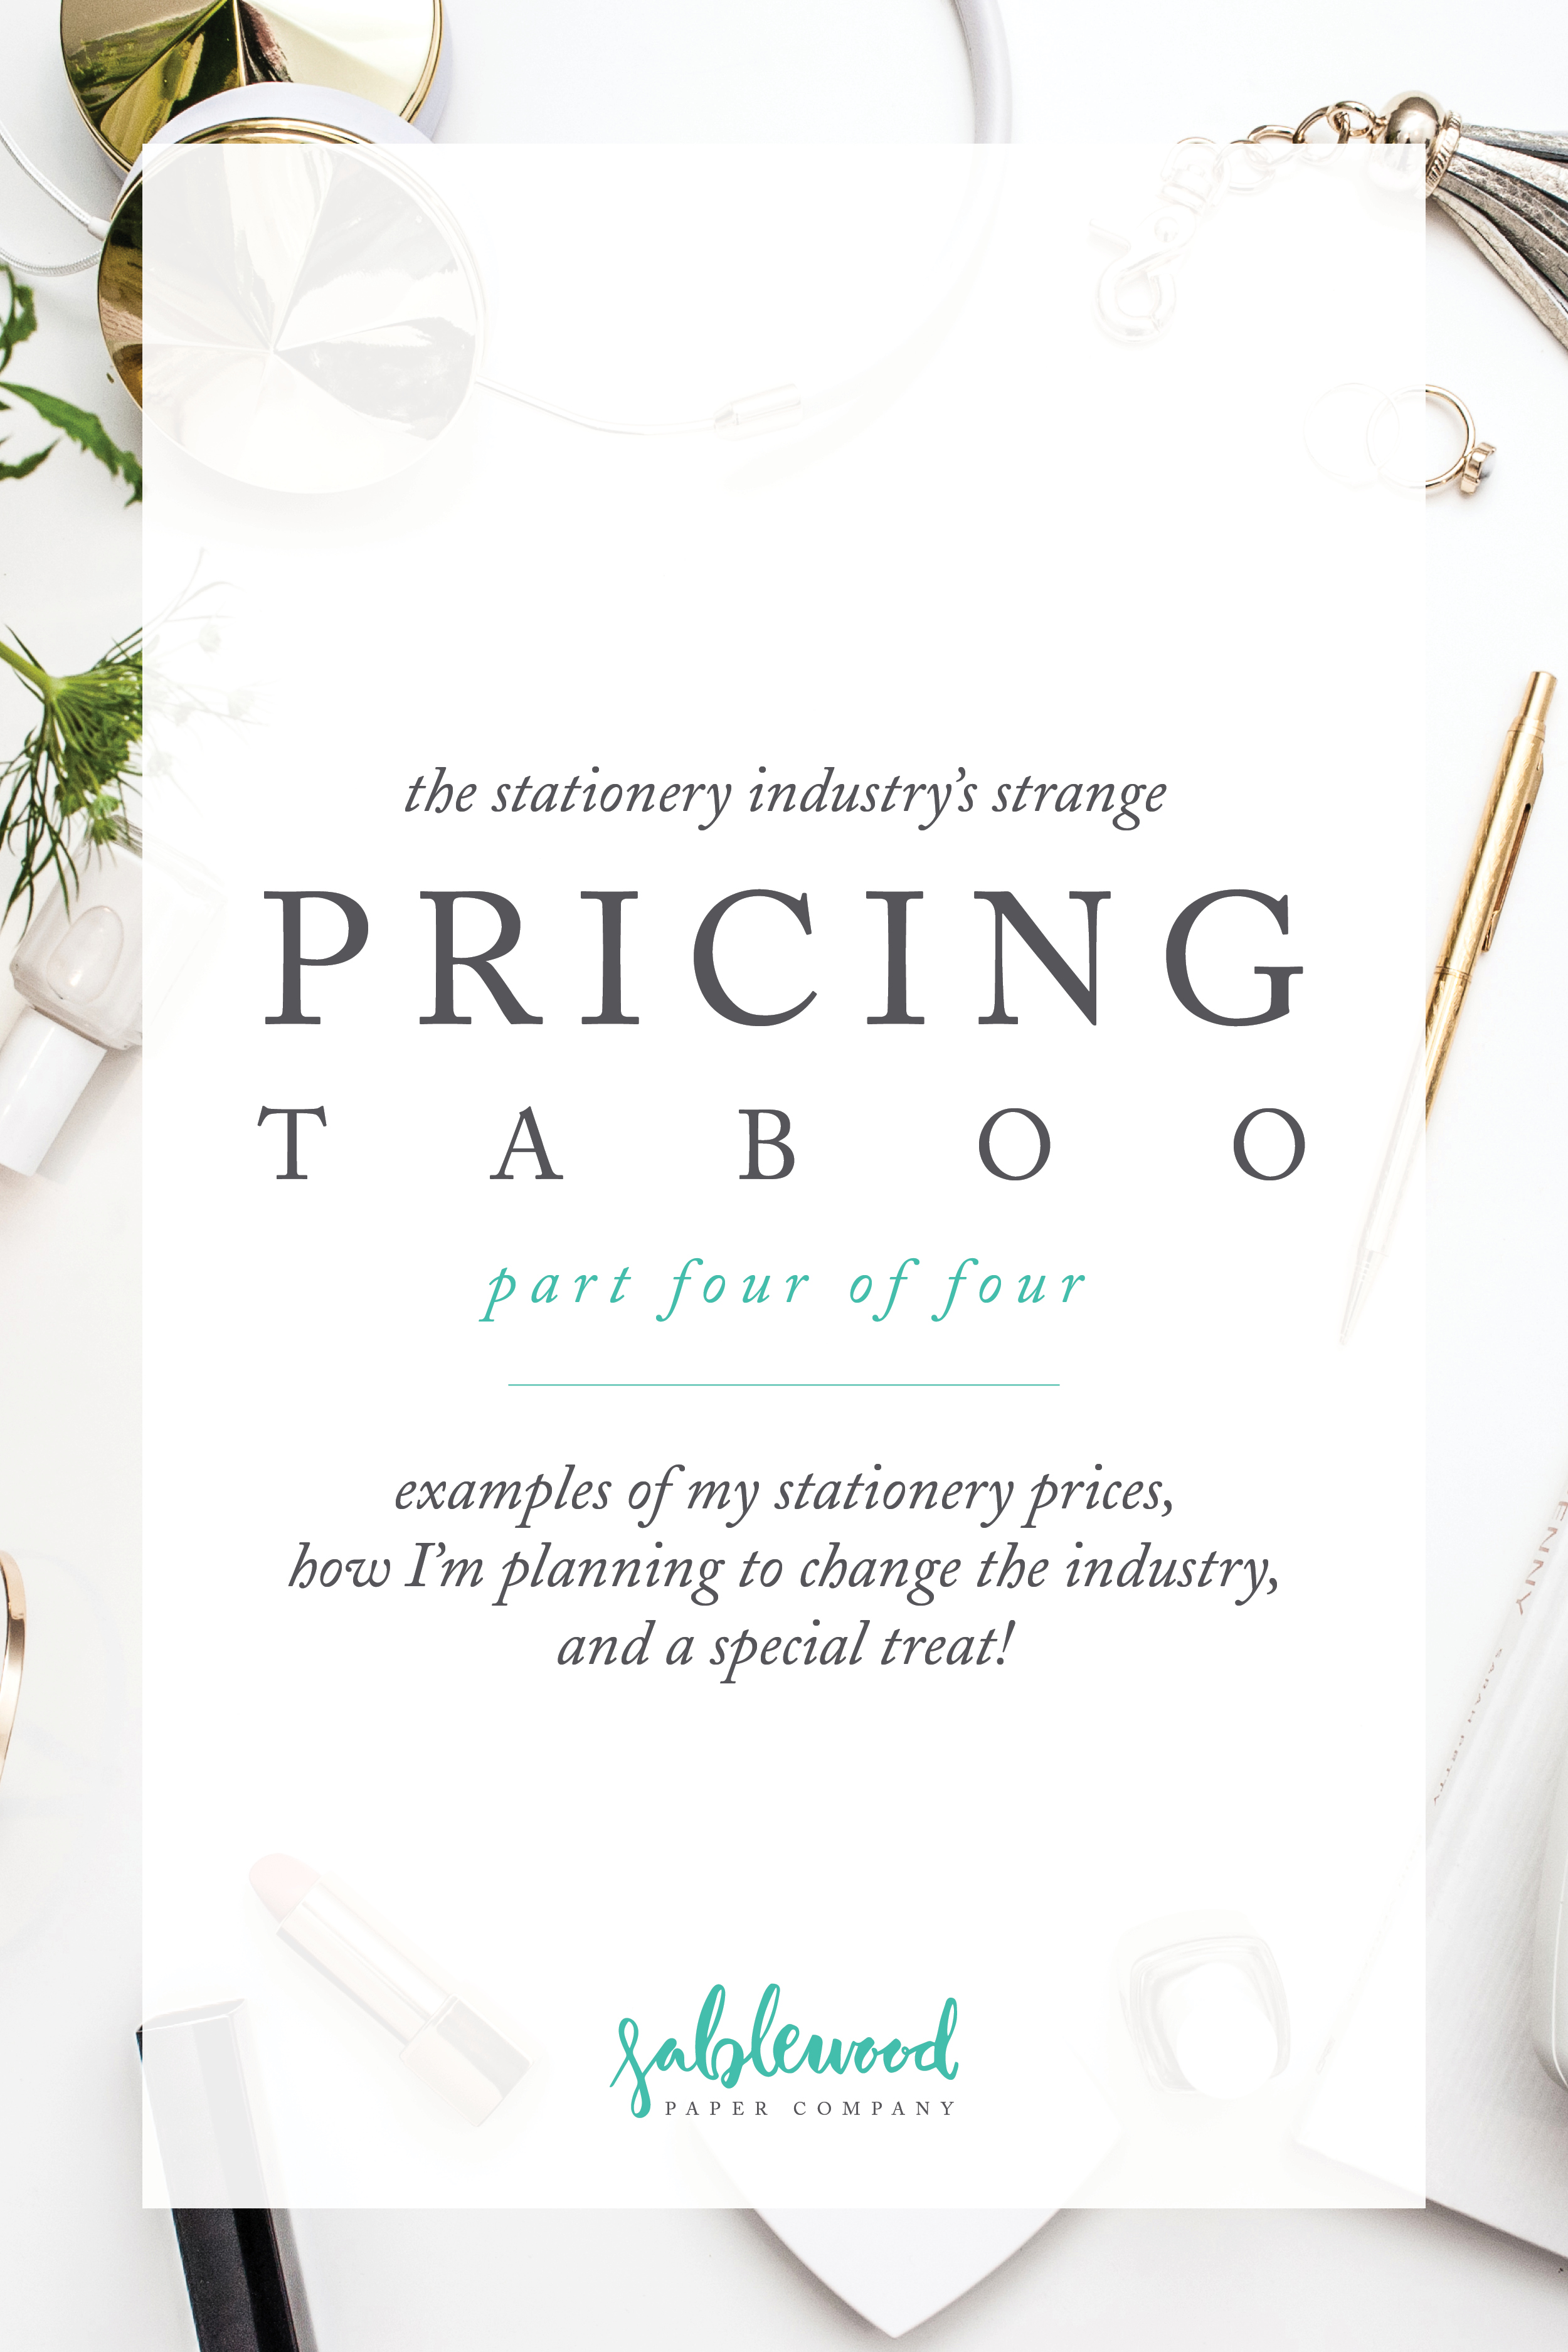 On the Blog: The Stationery Pricing Taboo Part Four